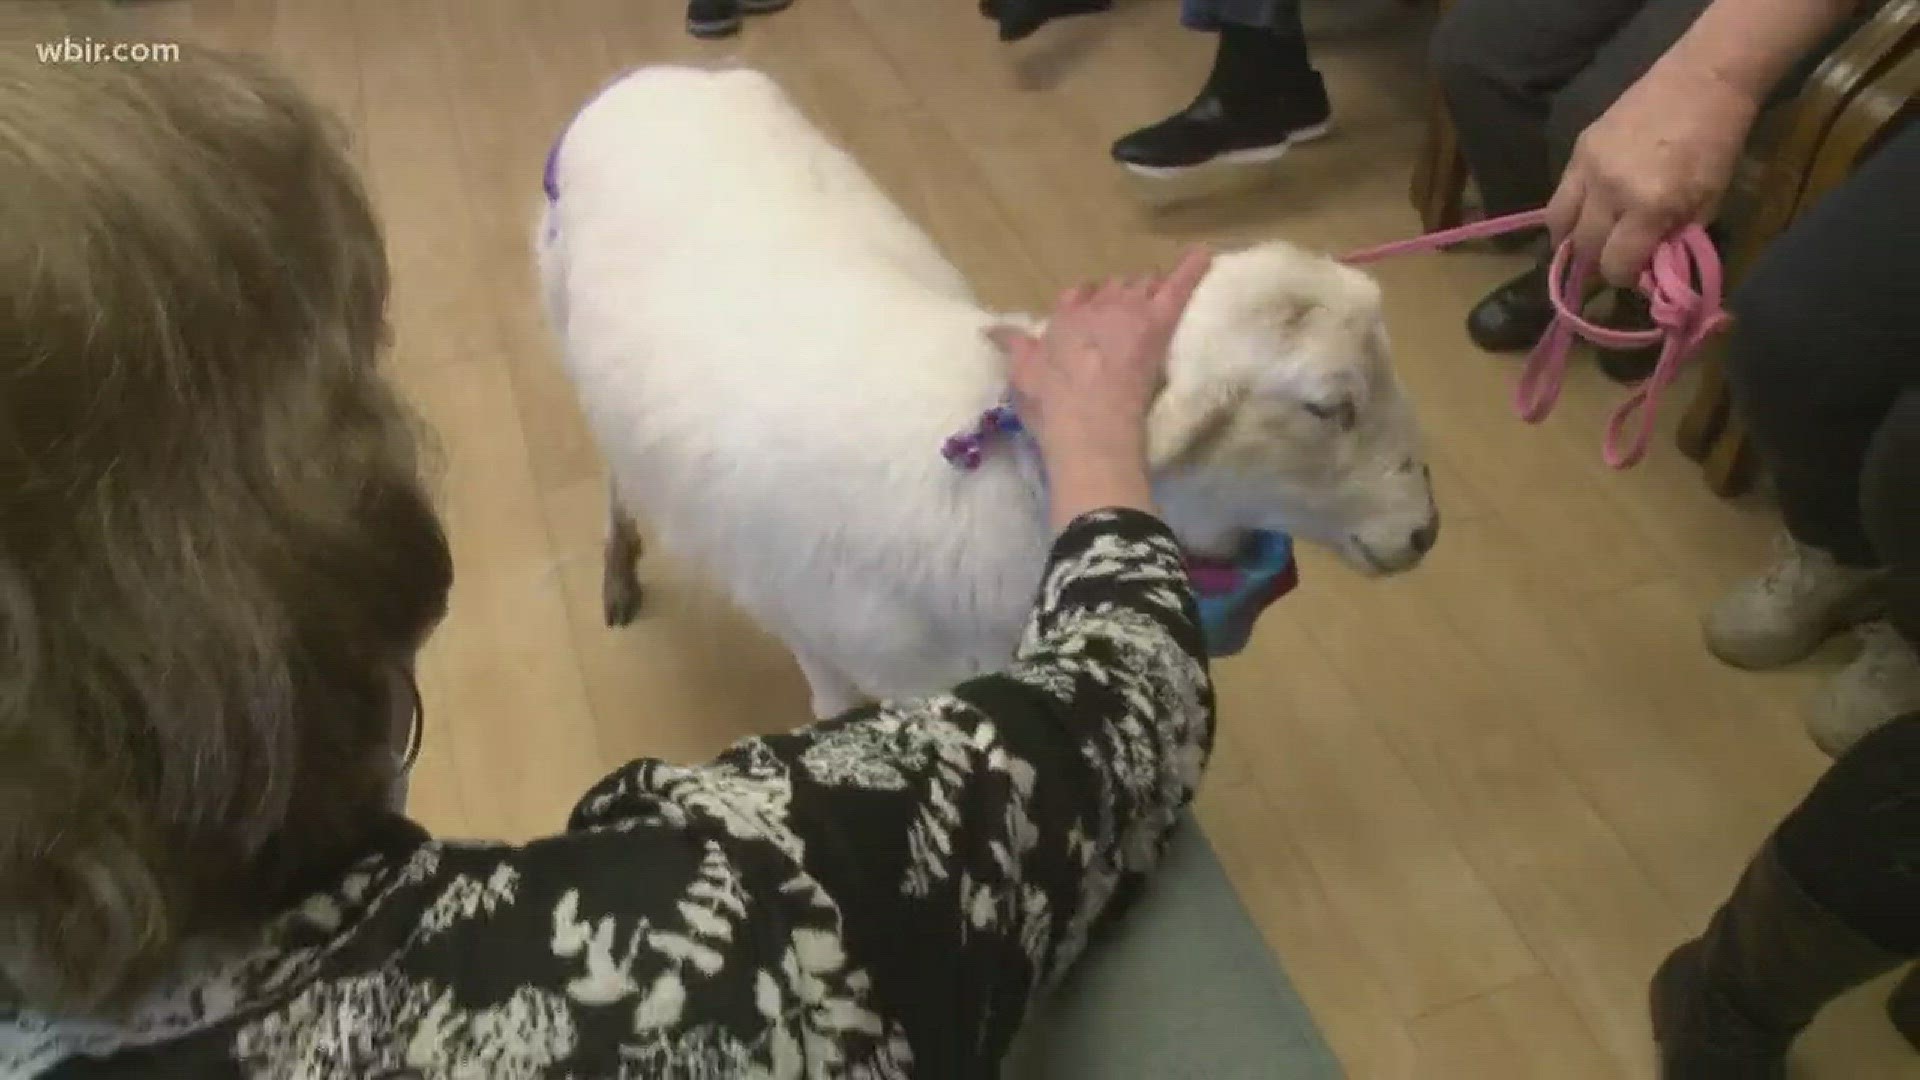 Destiny the therapy lamb lets people pet her so they will feel better. Live at Five at Four 2-27-18